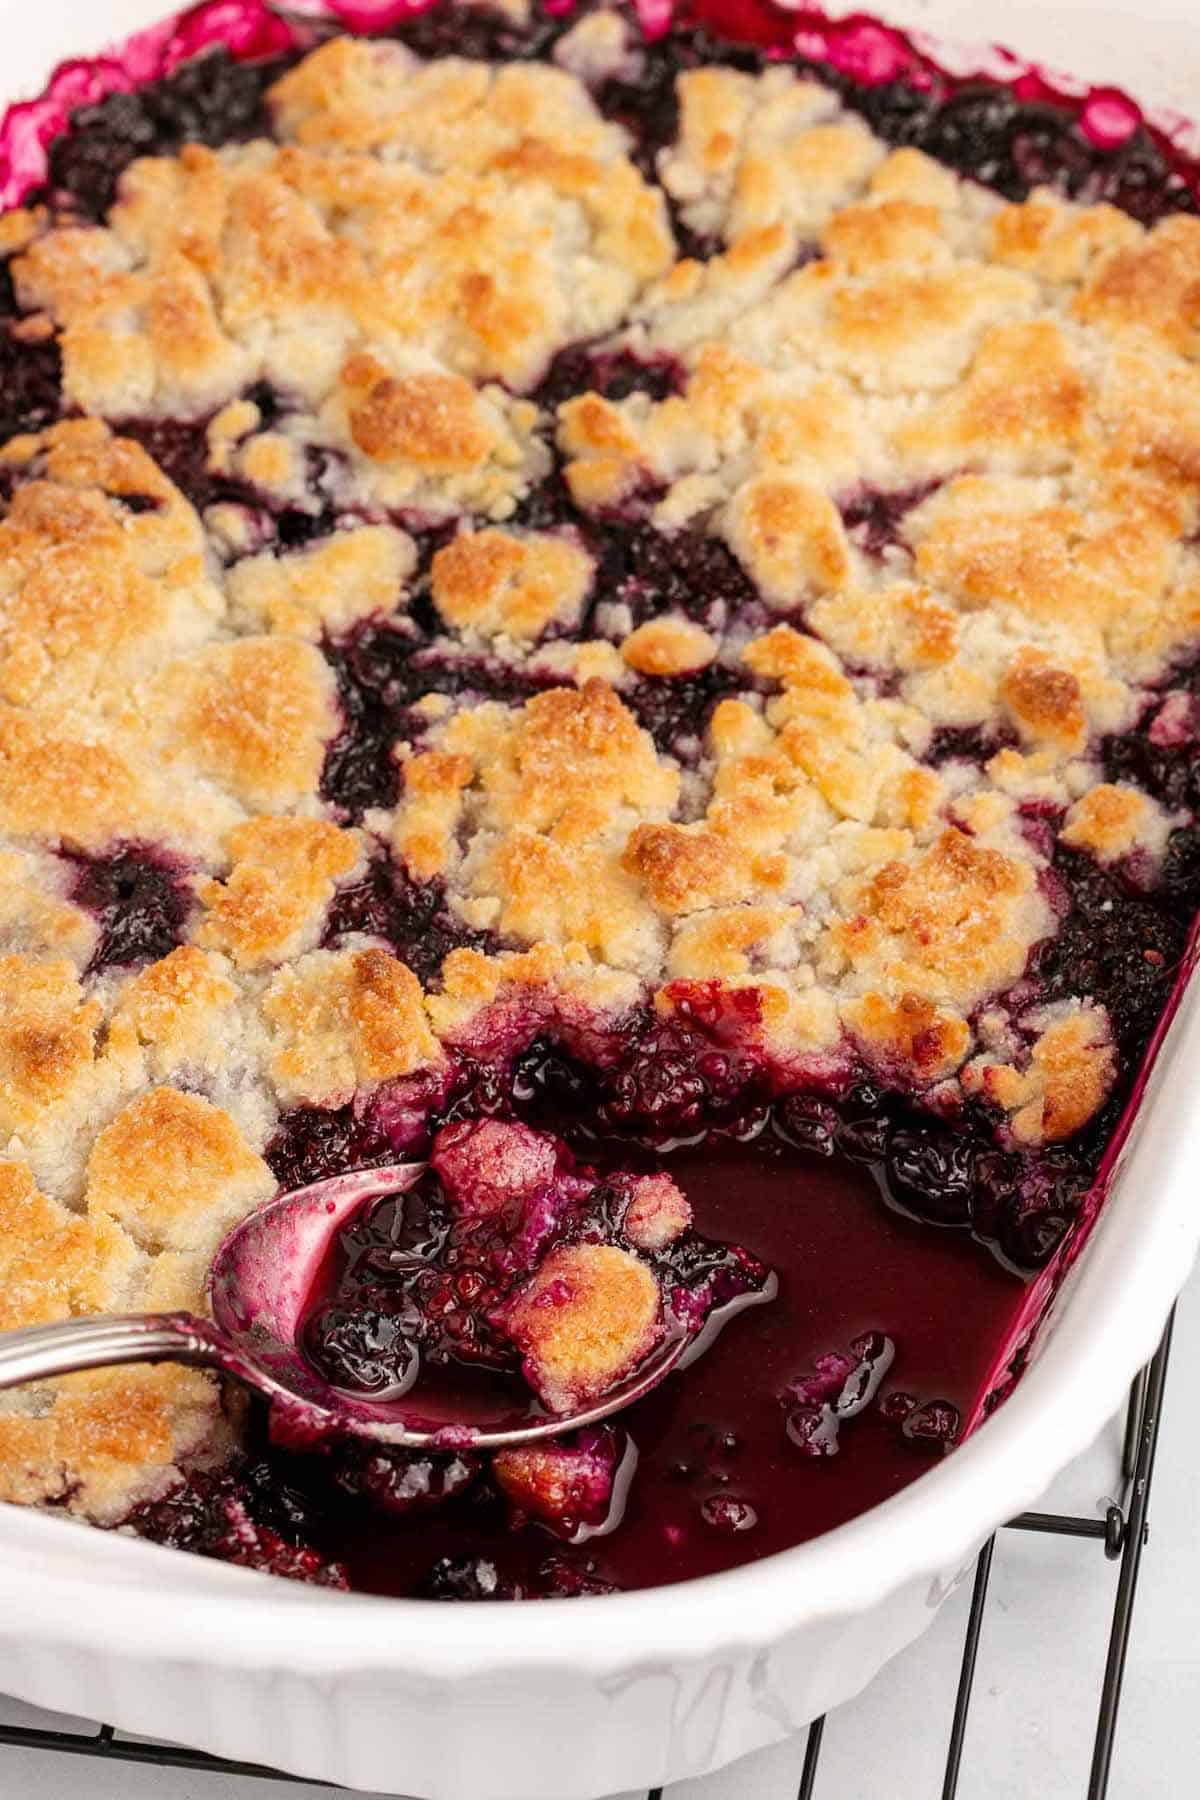 Fruit cobbler in a baking dish with a spoon scooping some out.